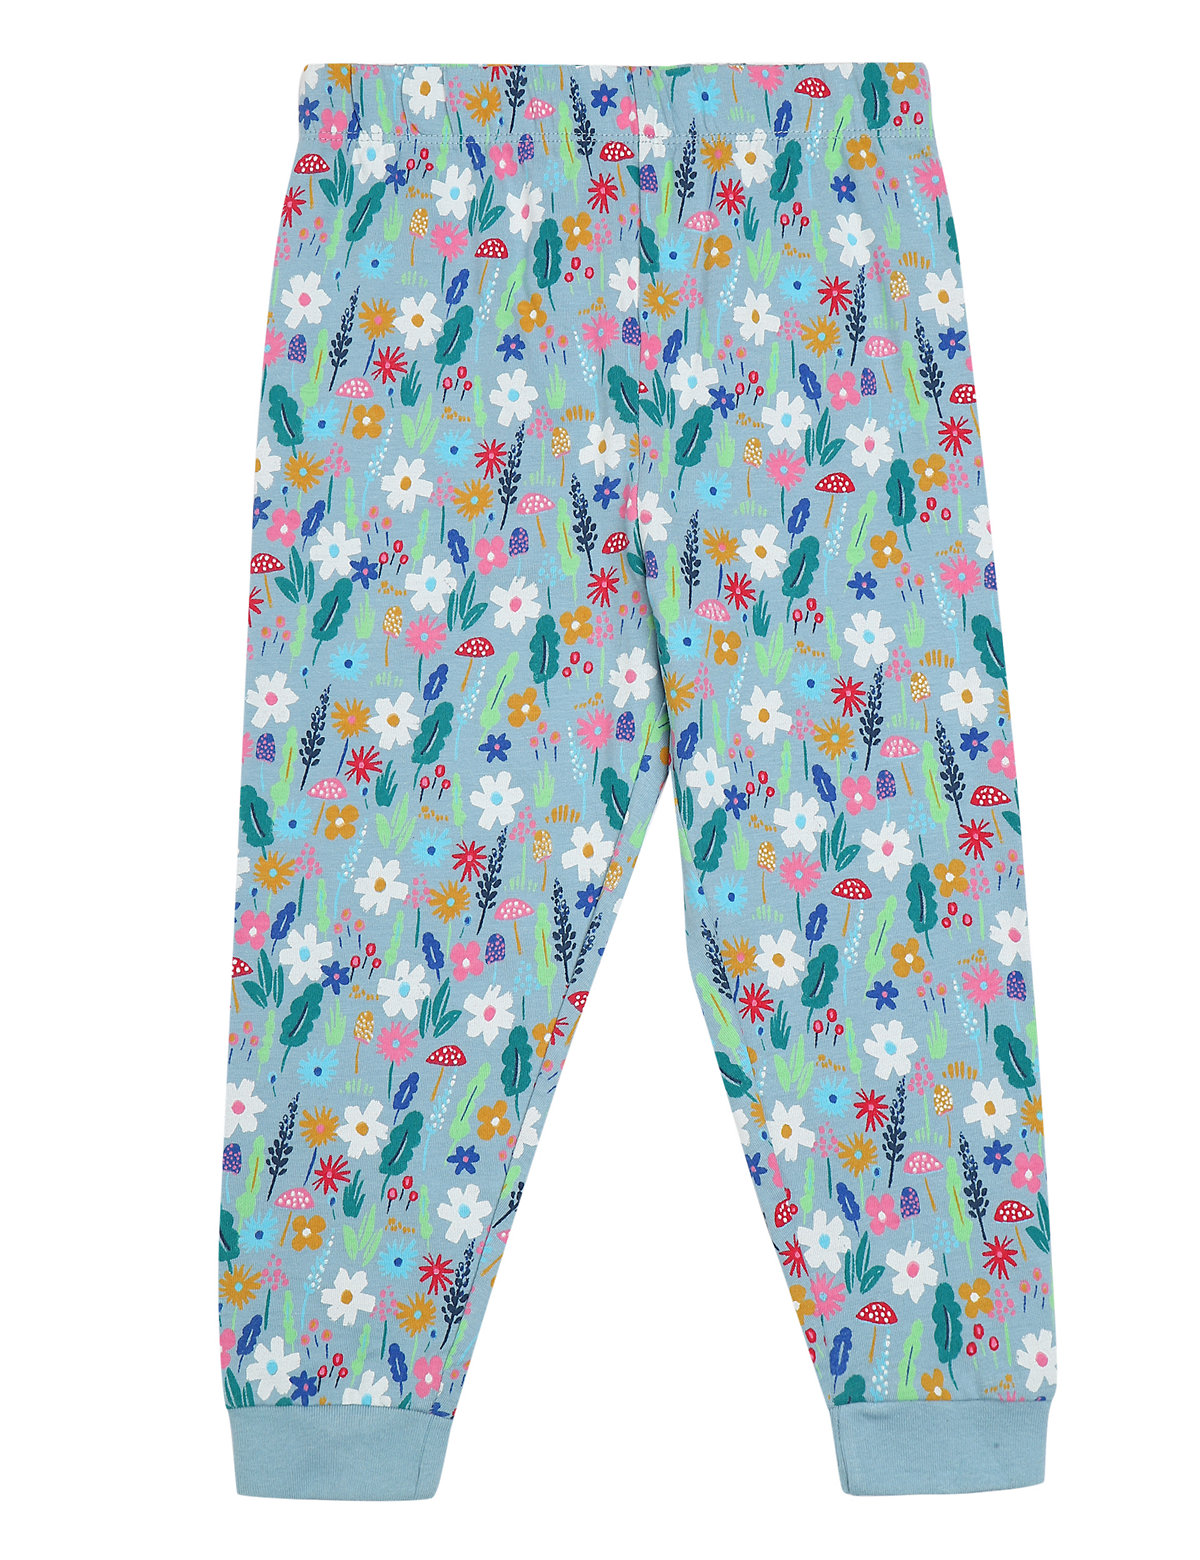 Pure Cotton Printed Night Suit Set of 2